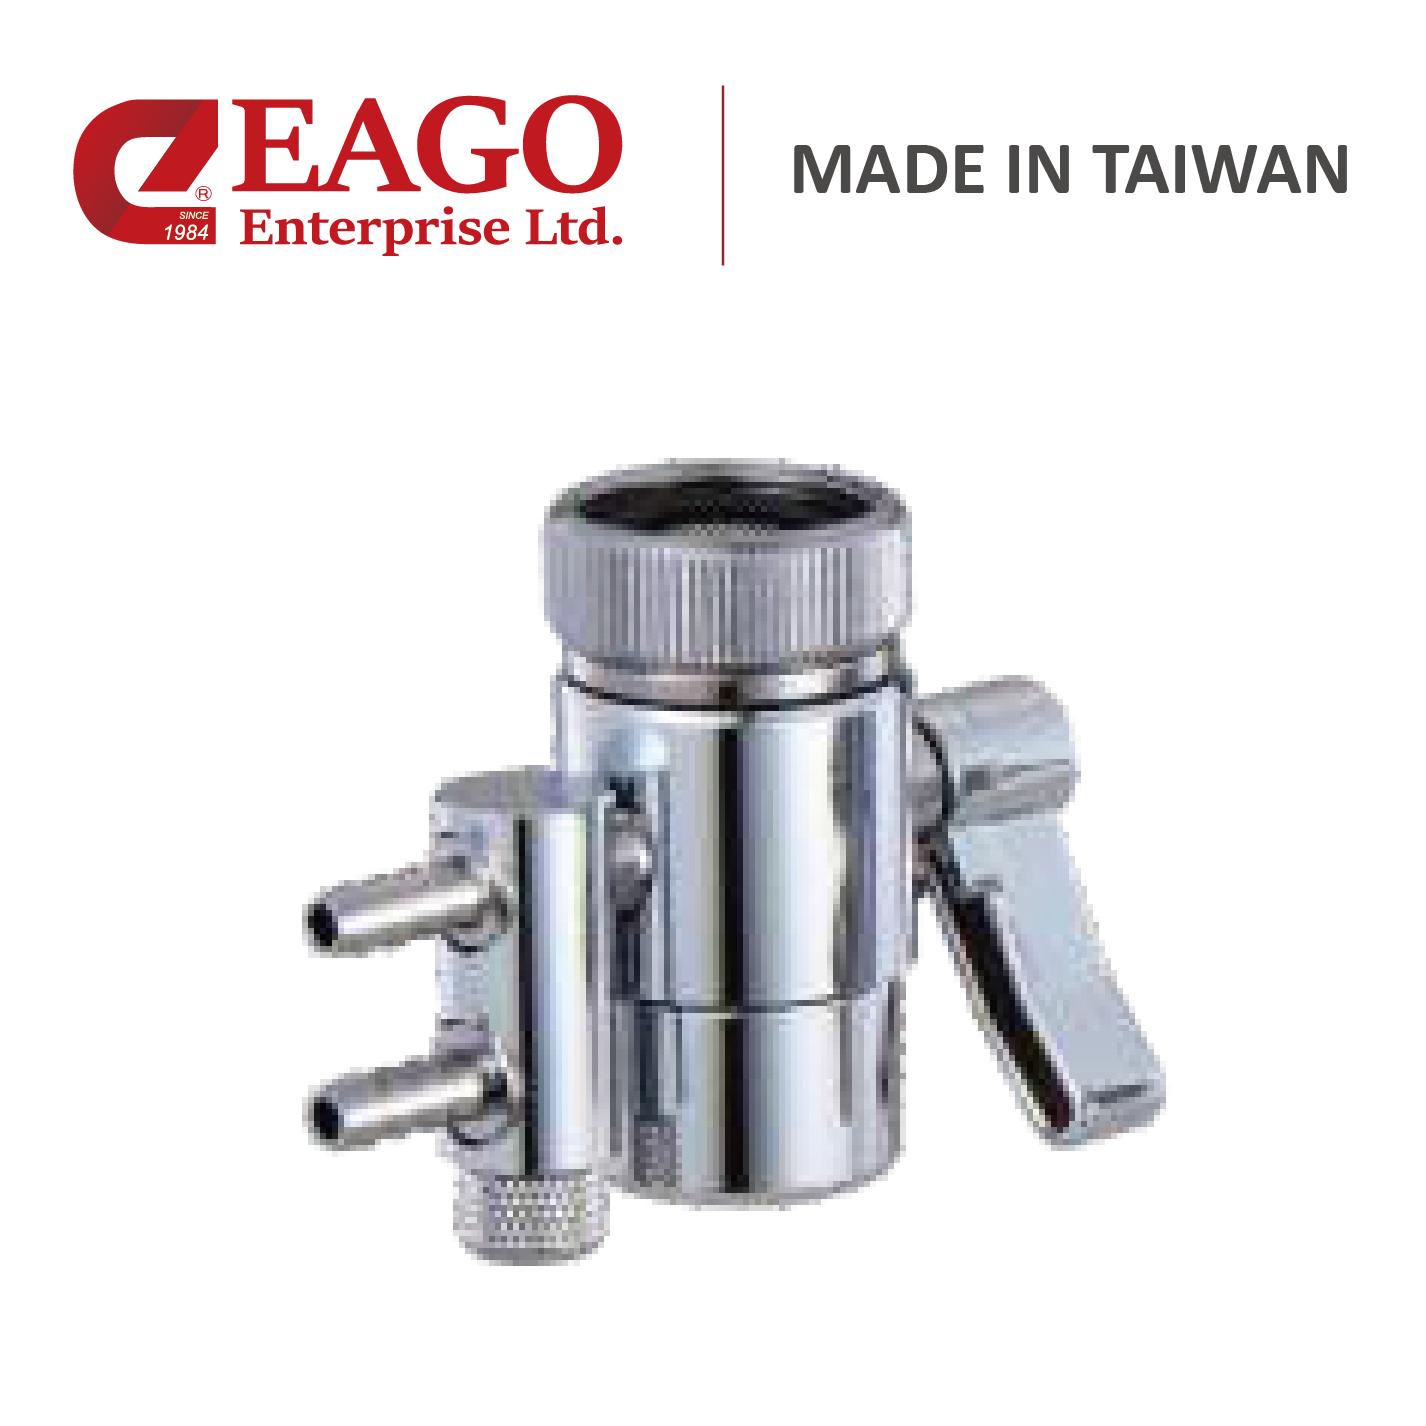 Product Water Diverter Valve / Faucet Diverter Valve(Two-Way Return) - EagoPure RO WATER FILTER SYSTEM image